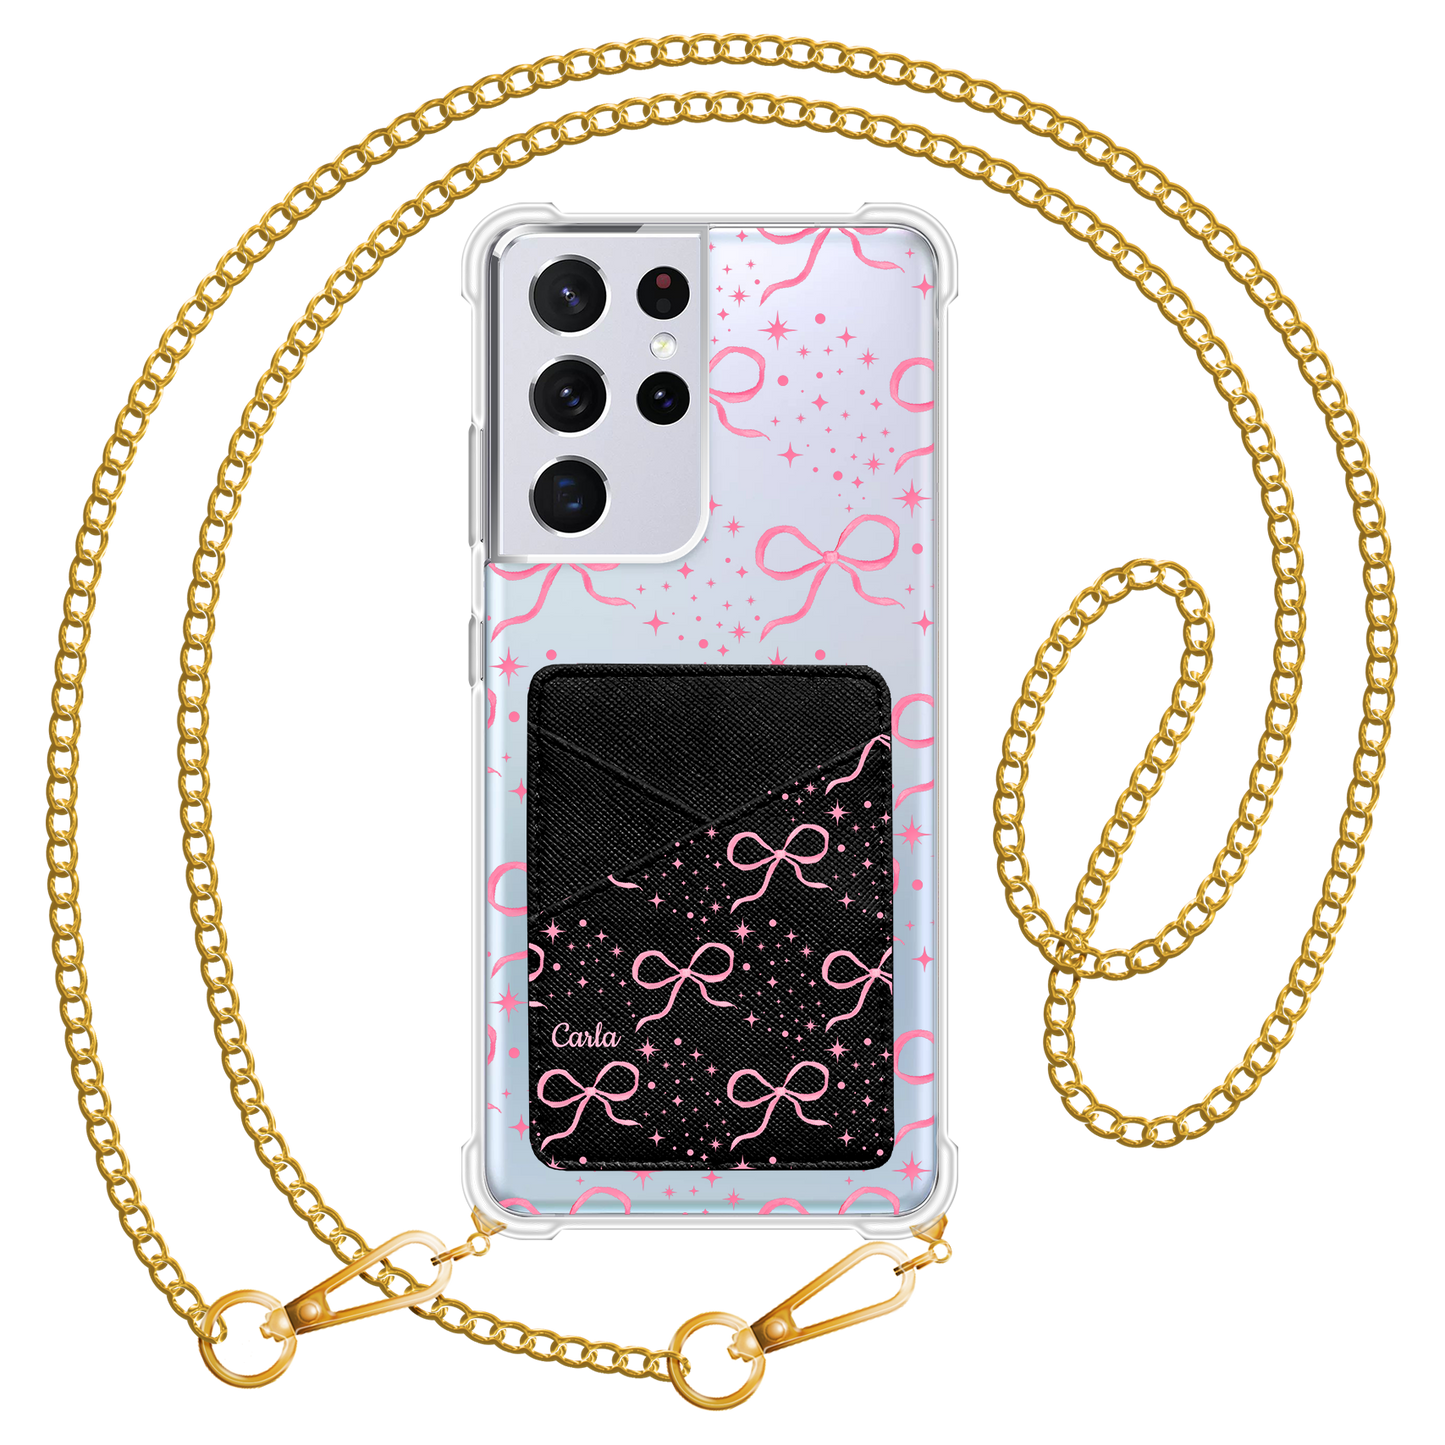 Android Phone Wallet Case - Coquette Glittery Blow